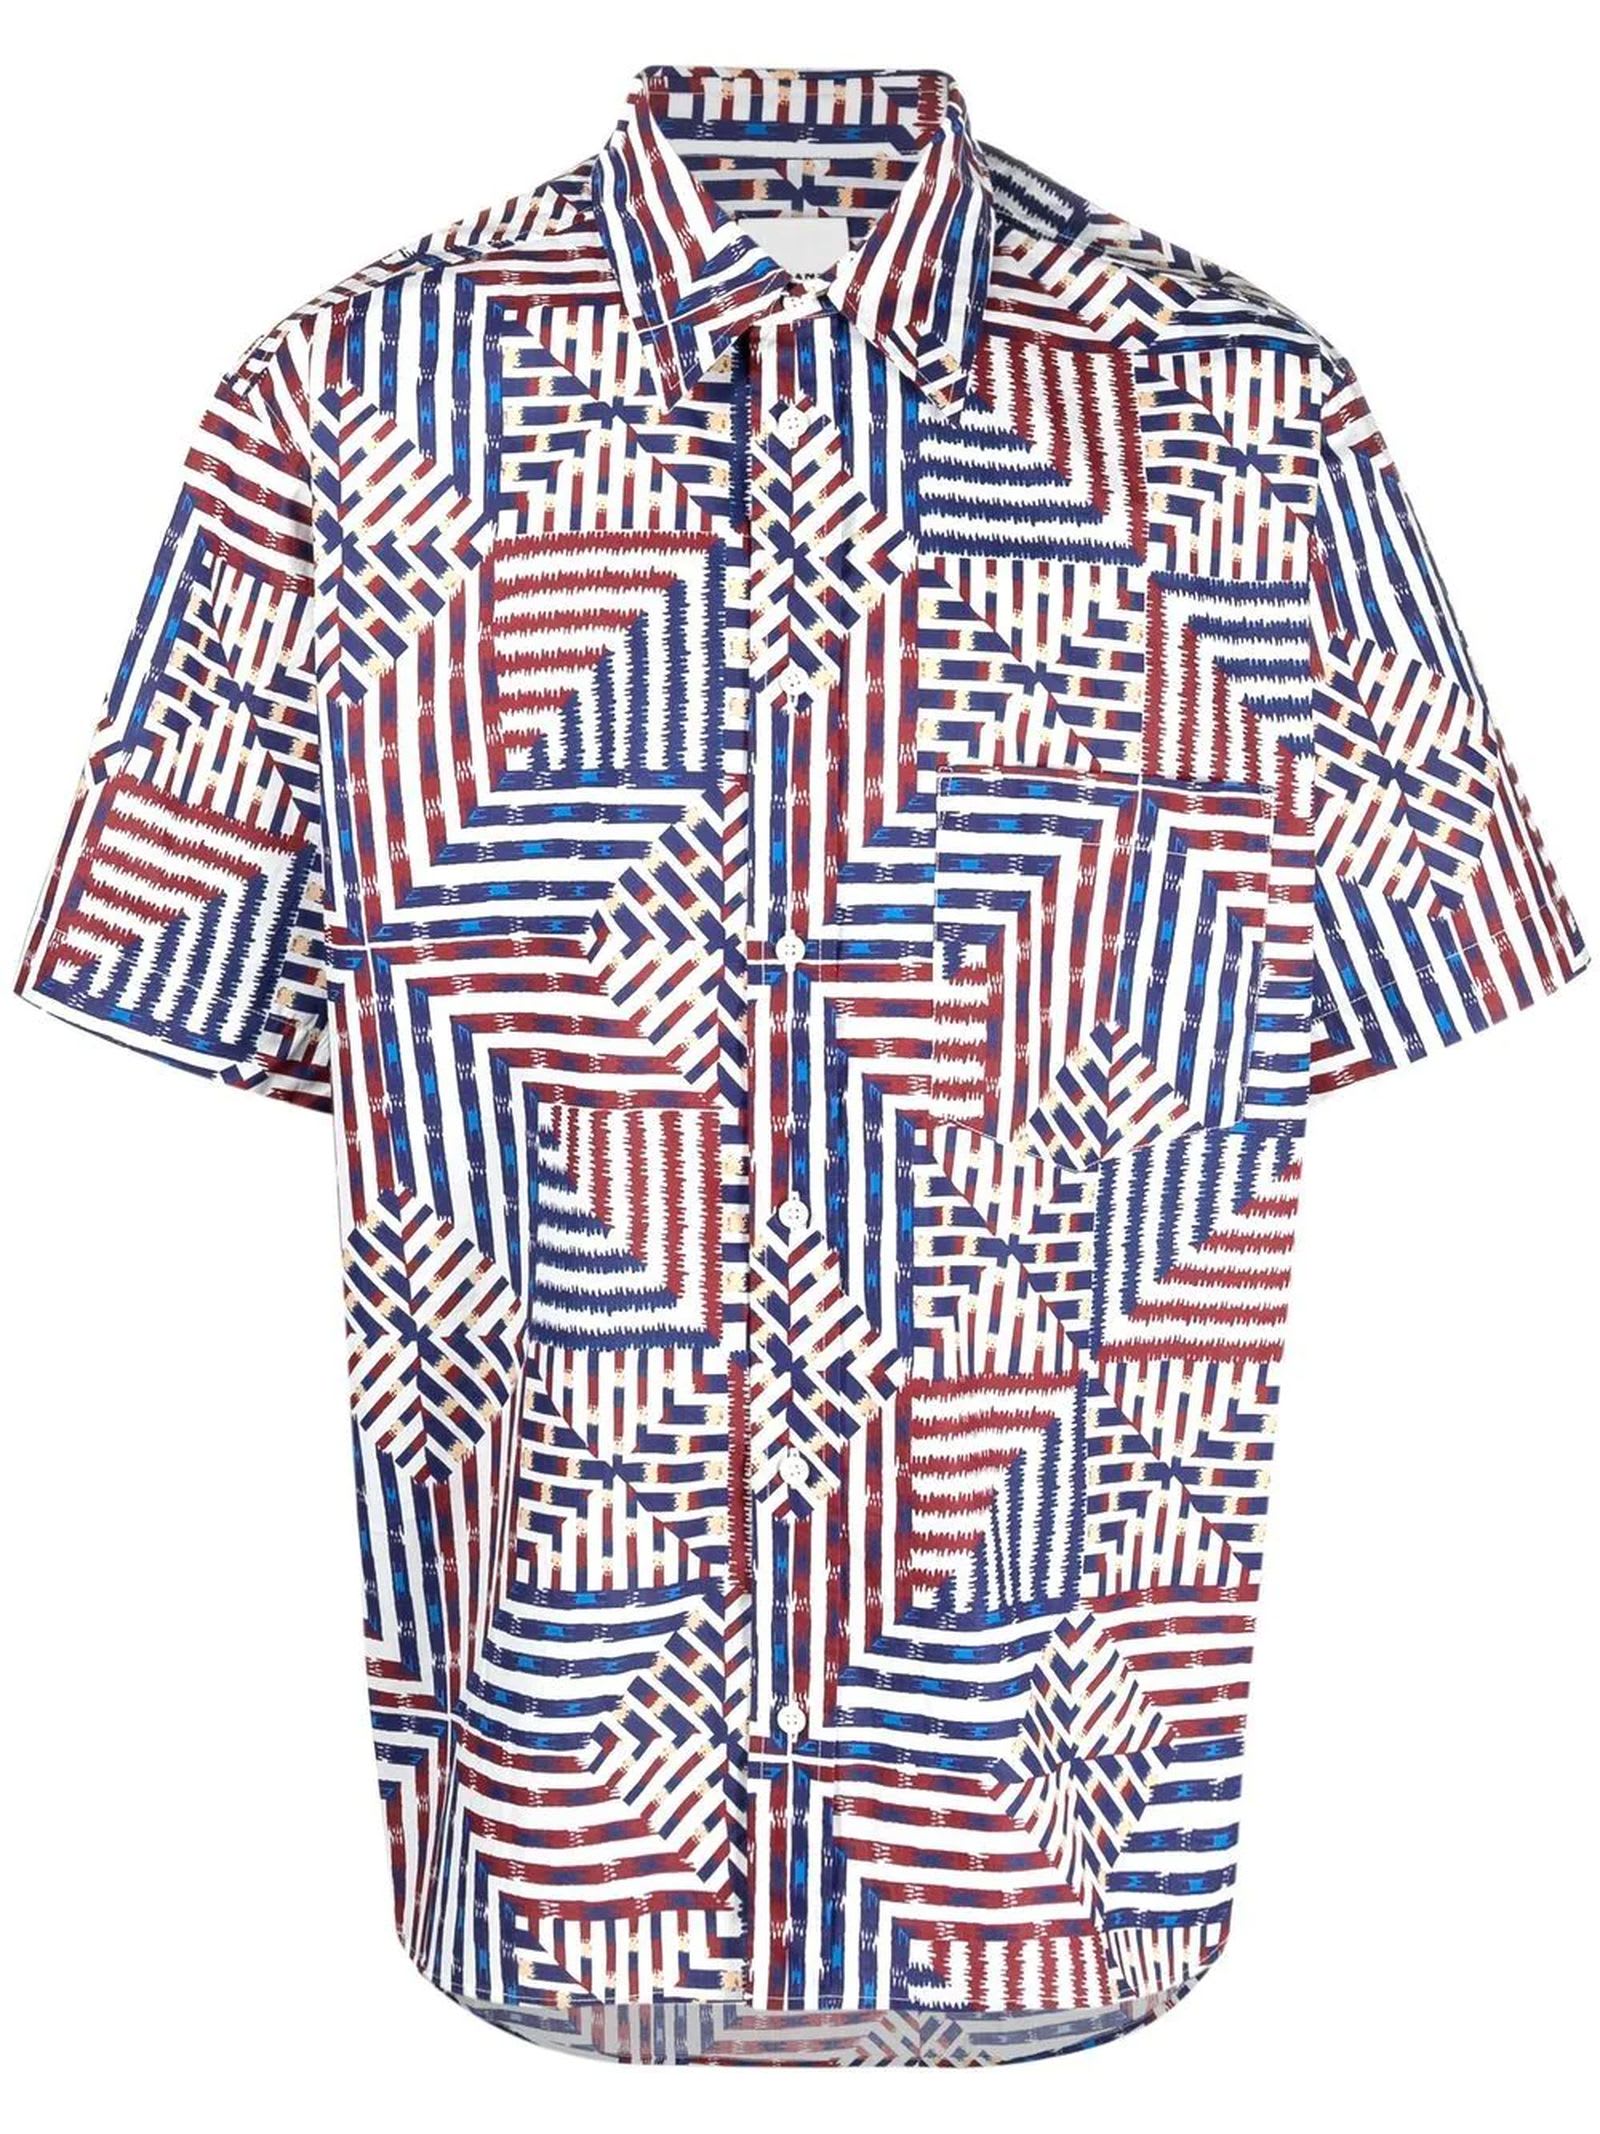 Isabel Marant Red, White And Blue Cotton Shirt